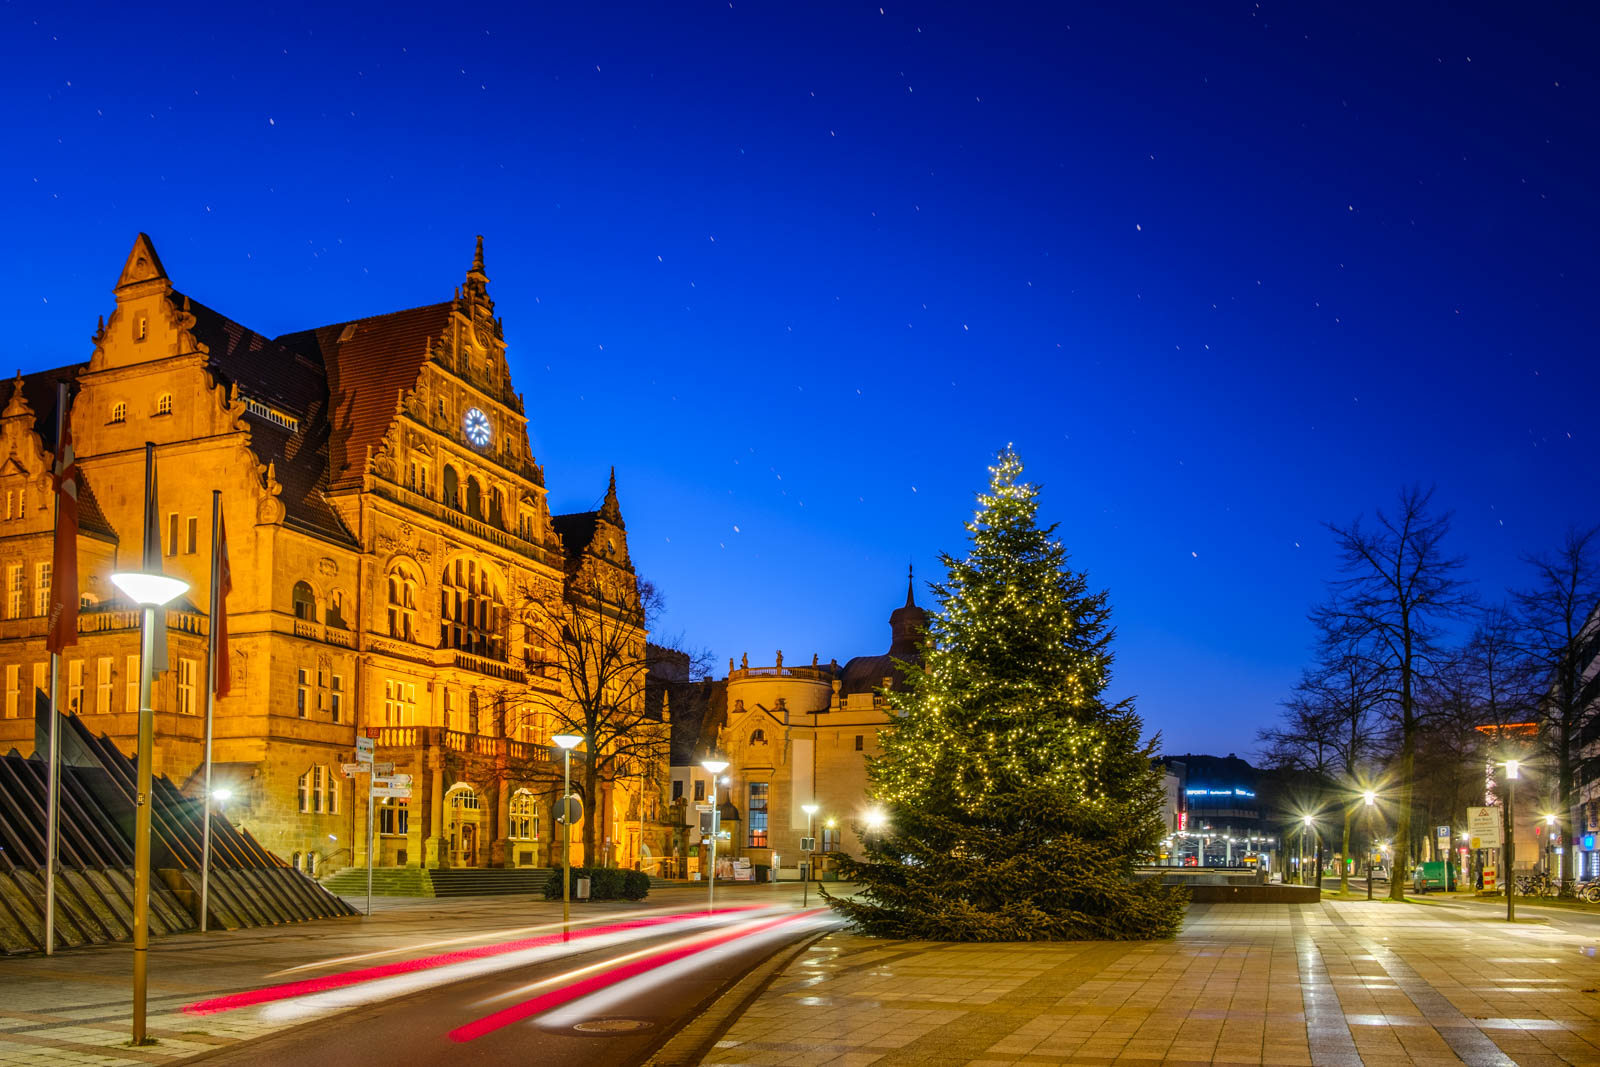 Christmas tree in front of the town hall (Bielefeld, Germany).